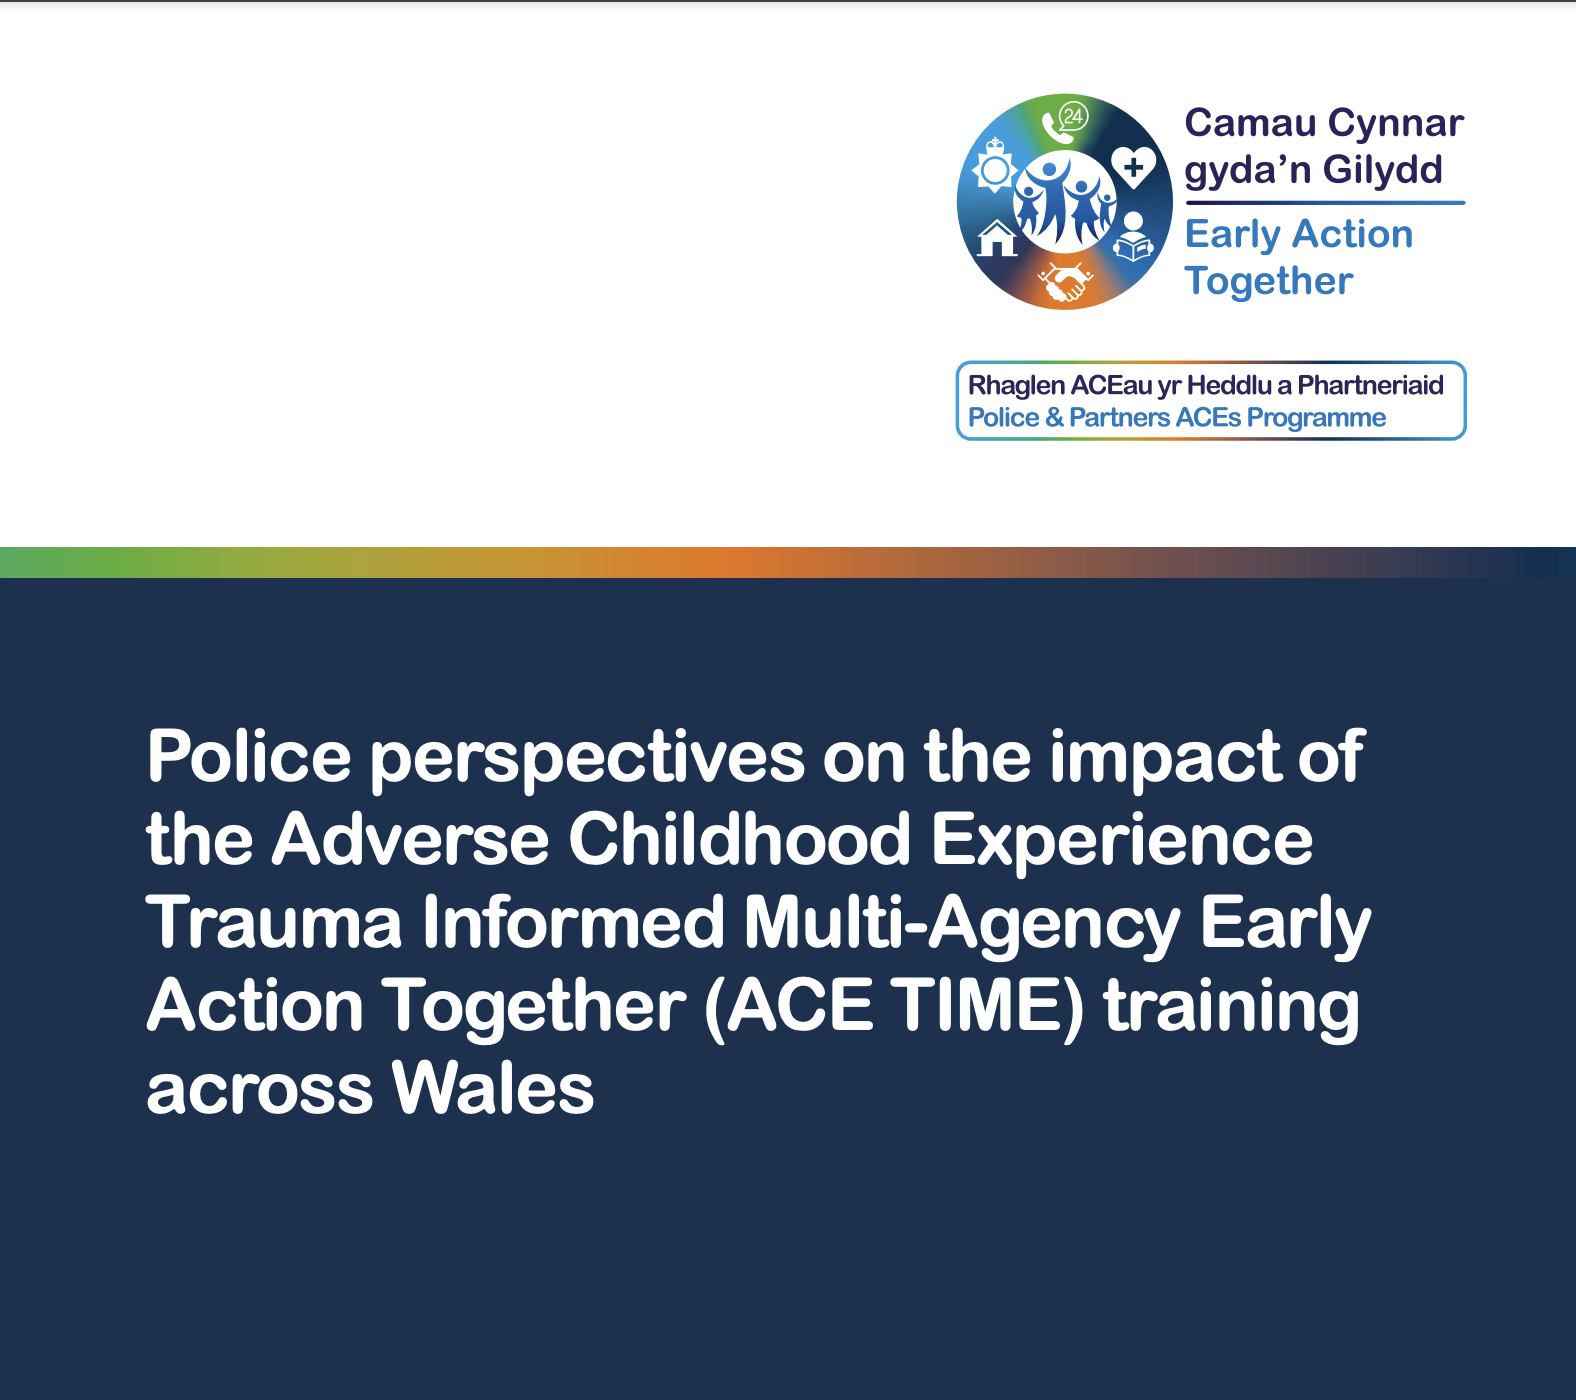 Police perspectives on the impact of the Adverse Childhood Experience Trauma Informed Multi-Agency Early Action Together (ACE TIME) training across Wales report